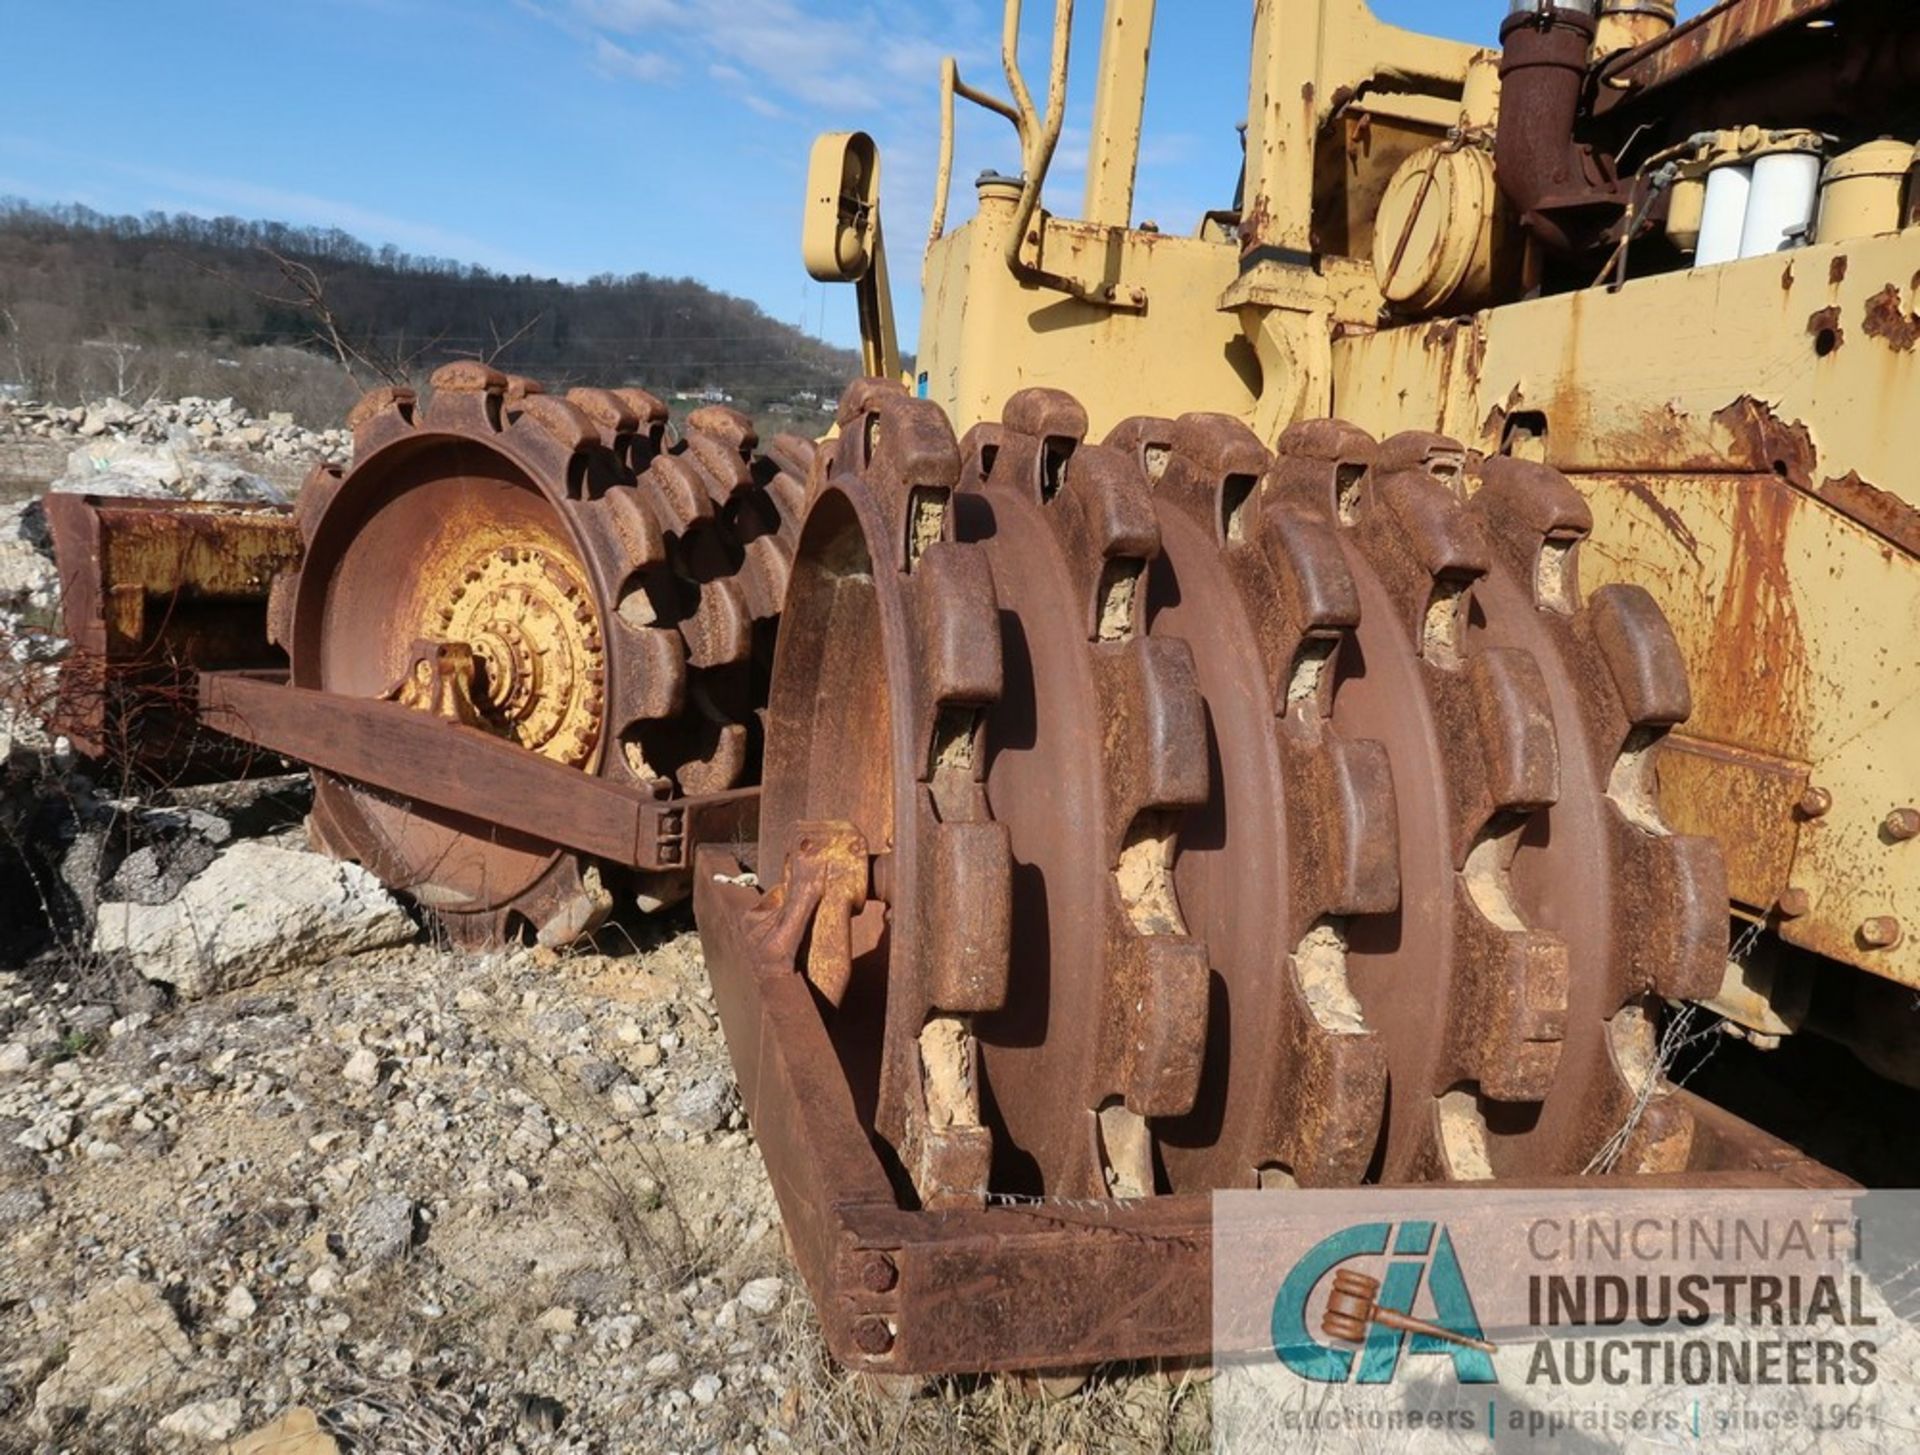 CATERPILLAR MODEL 825B SHEEPS FOOT COMPACTOR; S/N N/A (NEW 1973), 168" STRAIGHT BLADE, 46" WIDE - Image 13 of 16